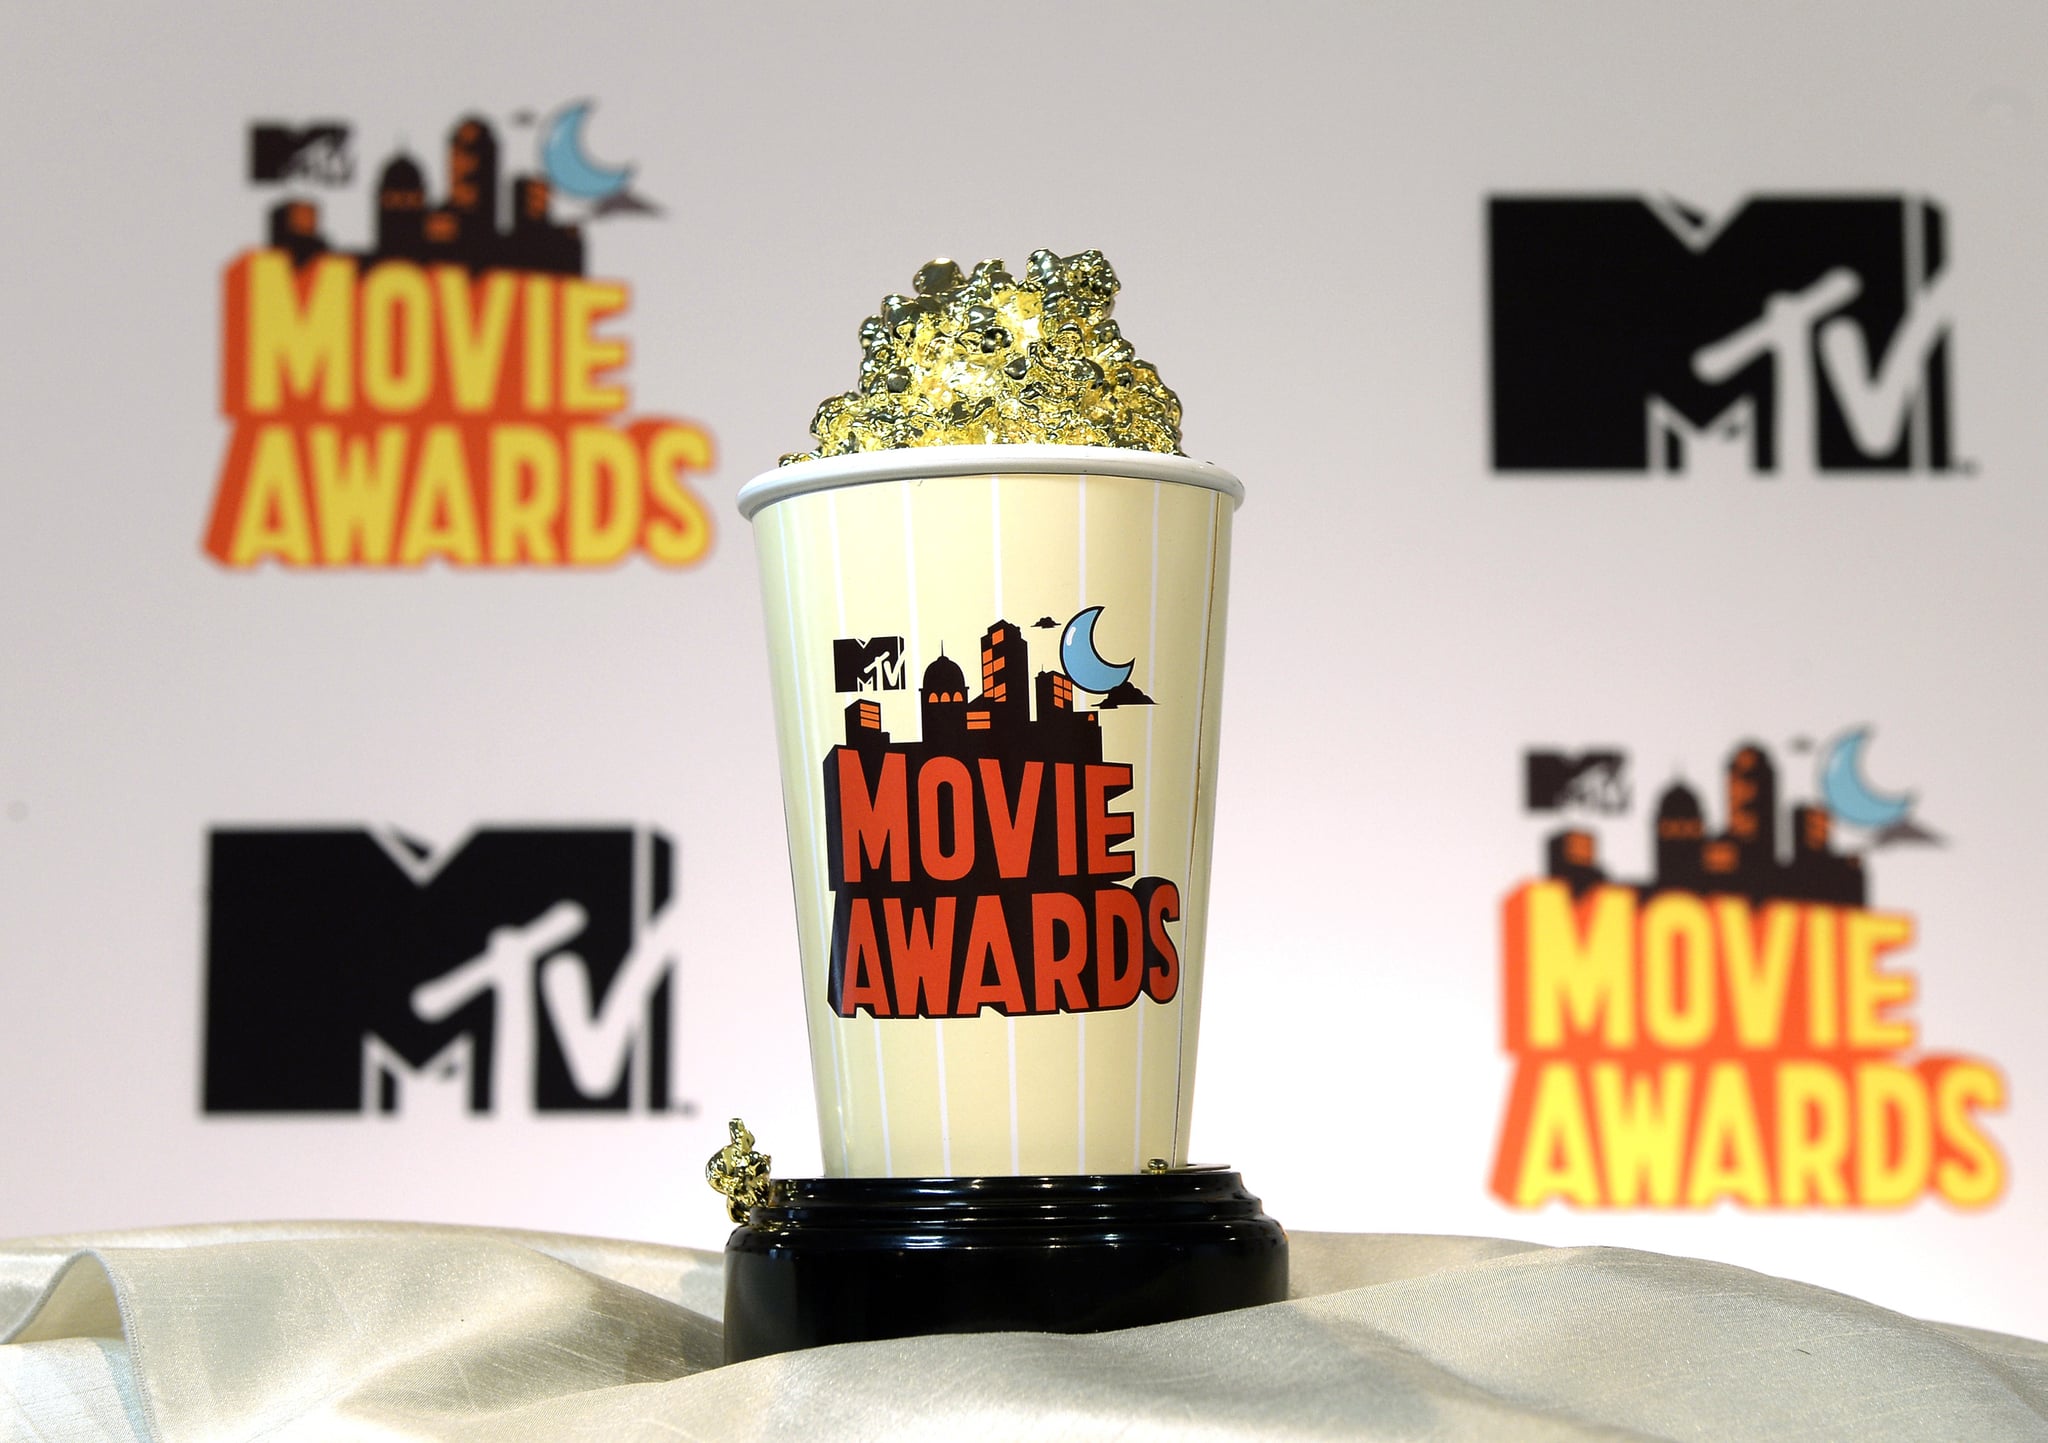 LOS ANGELES, CA - APRIL 9: The 2015 MTV Movies Awards' Golden Popcorn trophy is displayed during MTV Movie Awards press junket April 9, 2015, in Los Angeles, California. (Photo by Kevork Djansezian/Getty Images for MTV)